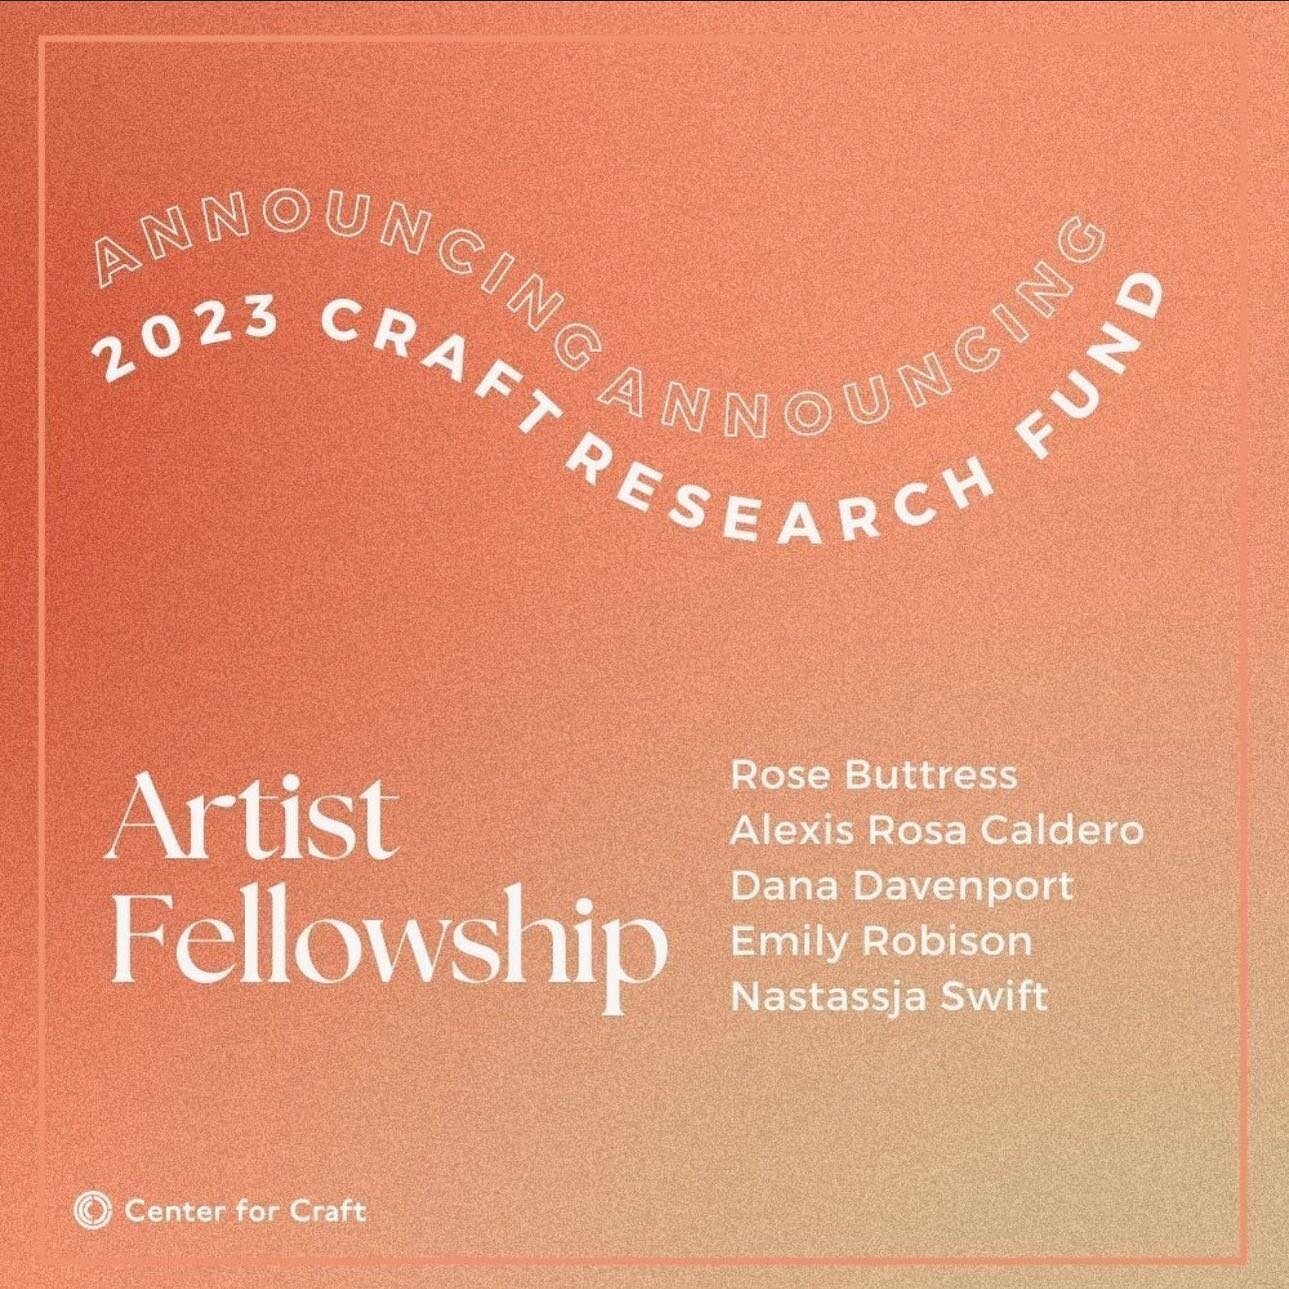 I am so grateful to be a 2023 Craft Research Fund Artist Fellow! The award gives me $10,000 in support of my project Beyond Ergonomics: Furnishing Healing. 

When pushing beyond generalized standards, studio furniture holds the capacity to address in